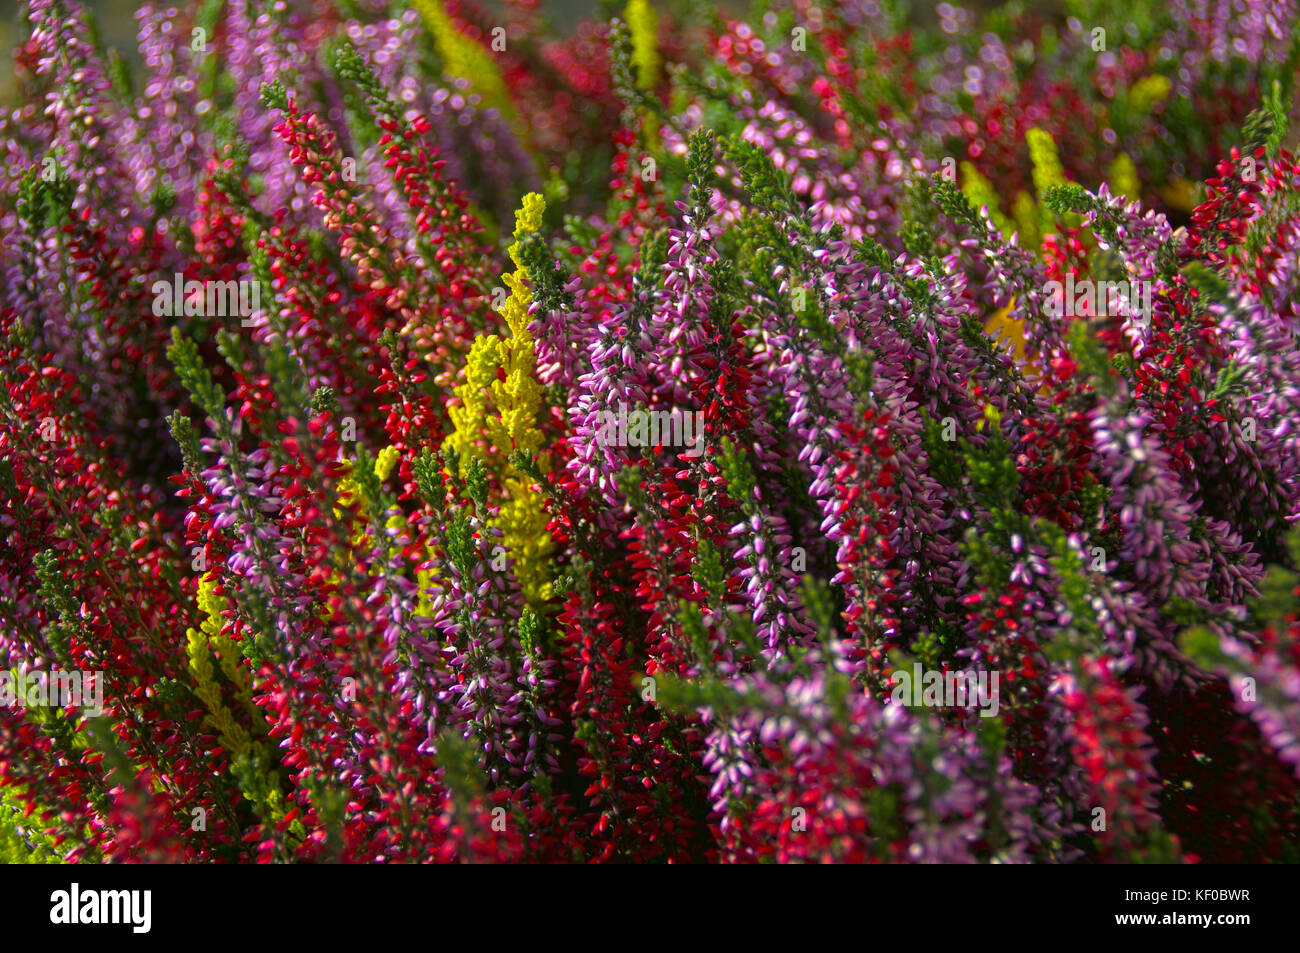 A colorful composition of heather flowers. Typical of autumn plants blooming. Stock Photo